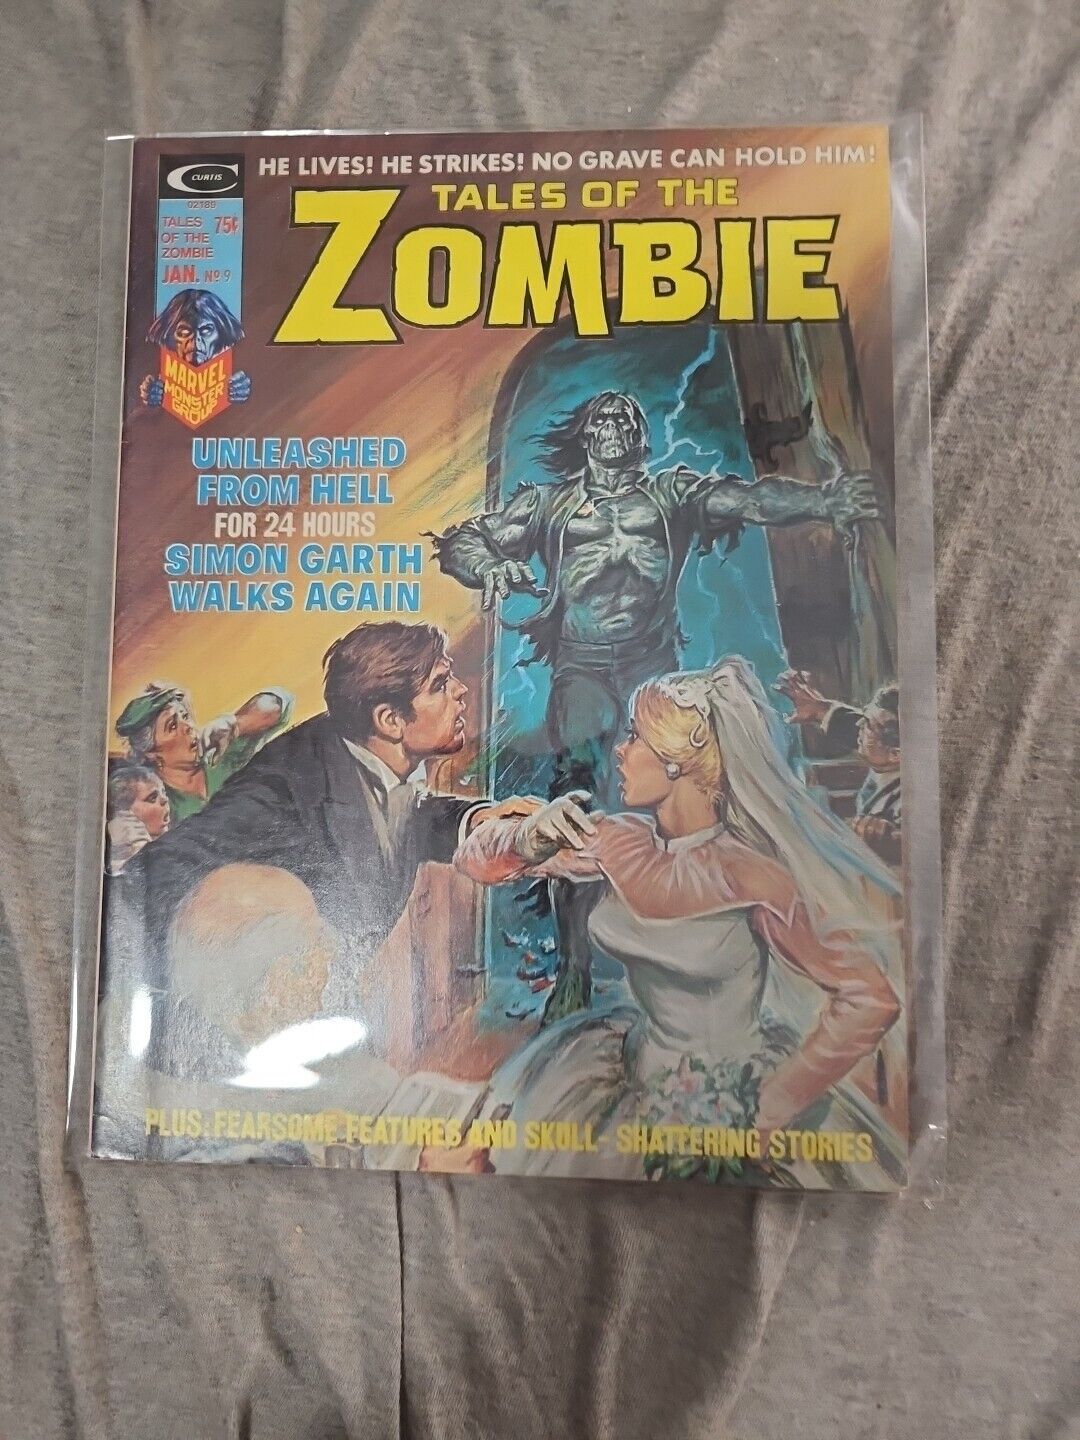 CURTIS COMICS TALES OF THE ZOMBIE #9 MARVEL COMIC GROUP 1974